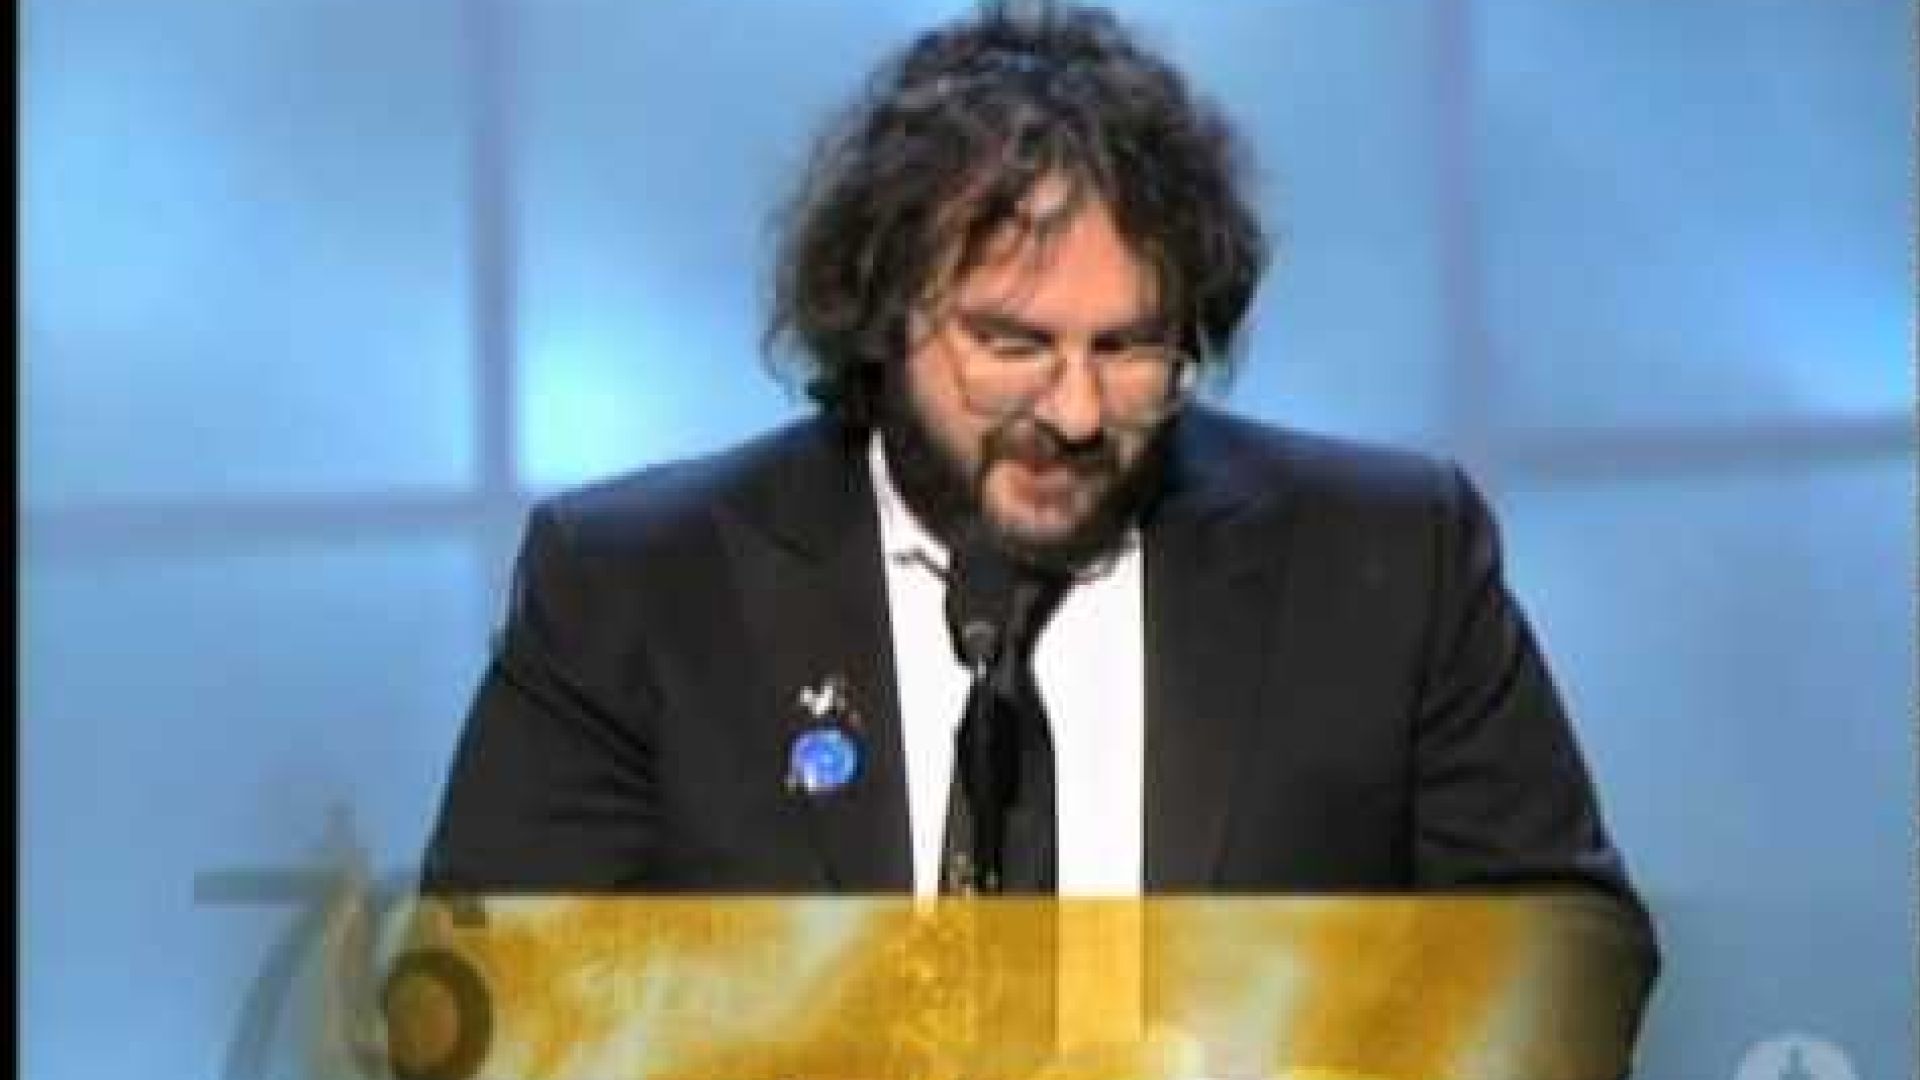 Hobbits Go Mainstream when Lord of the Rings Wins Best Picture Oscar